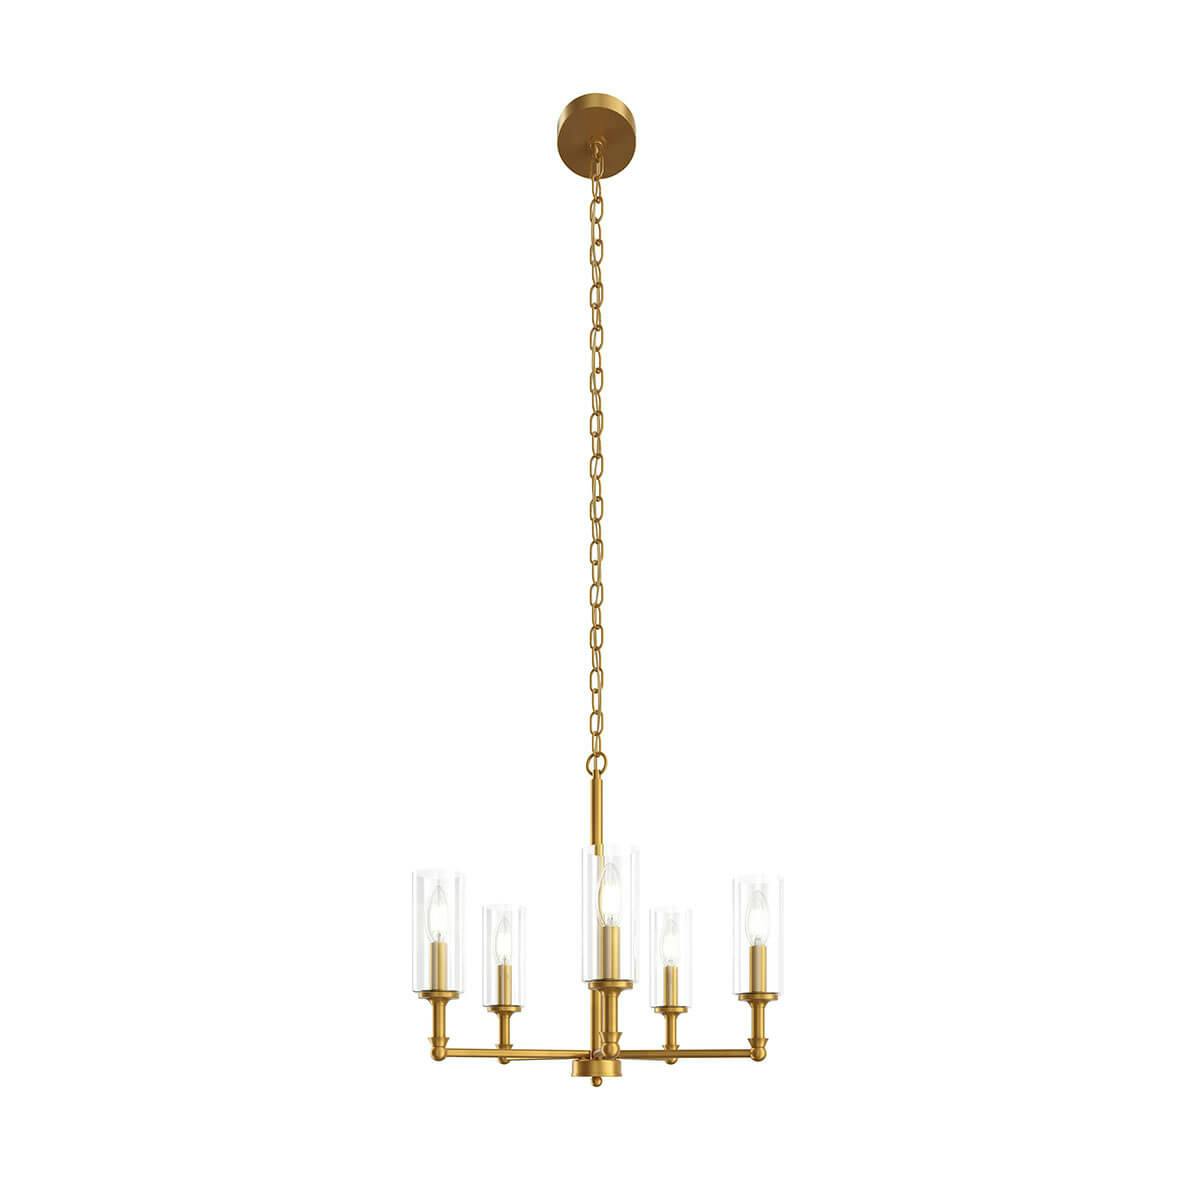 Soniat 5 Light Chandelier Classic Gold on a white background